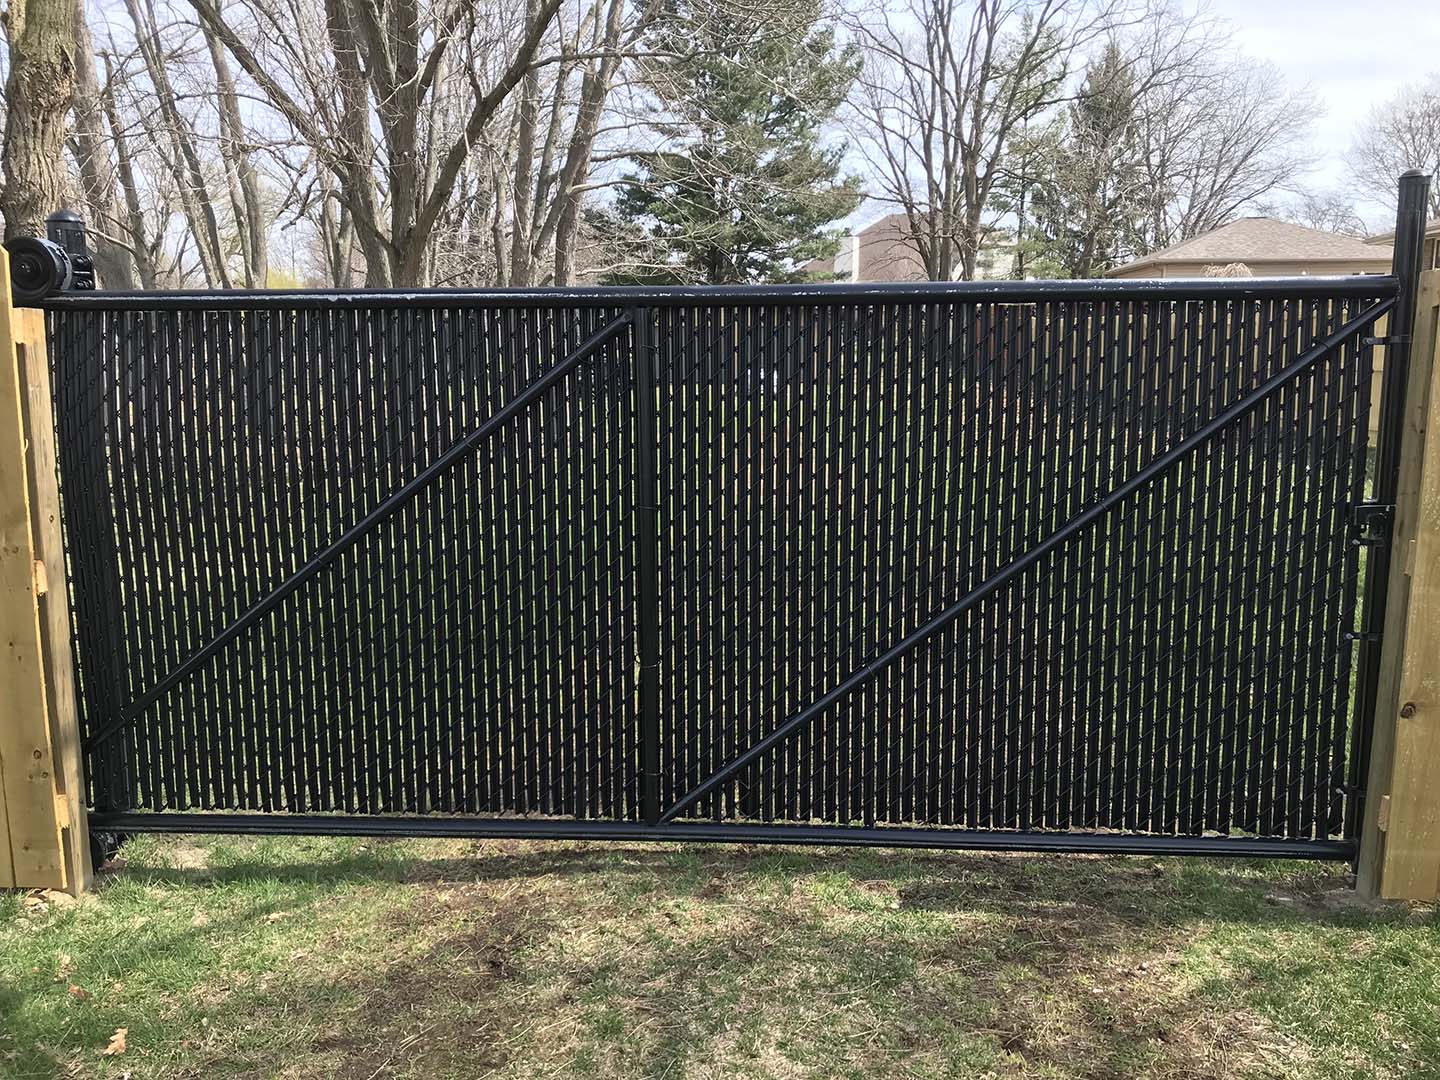 Photo of chain link fence in Valparaiso, Indiana with privacy slats